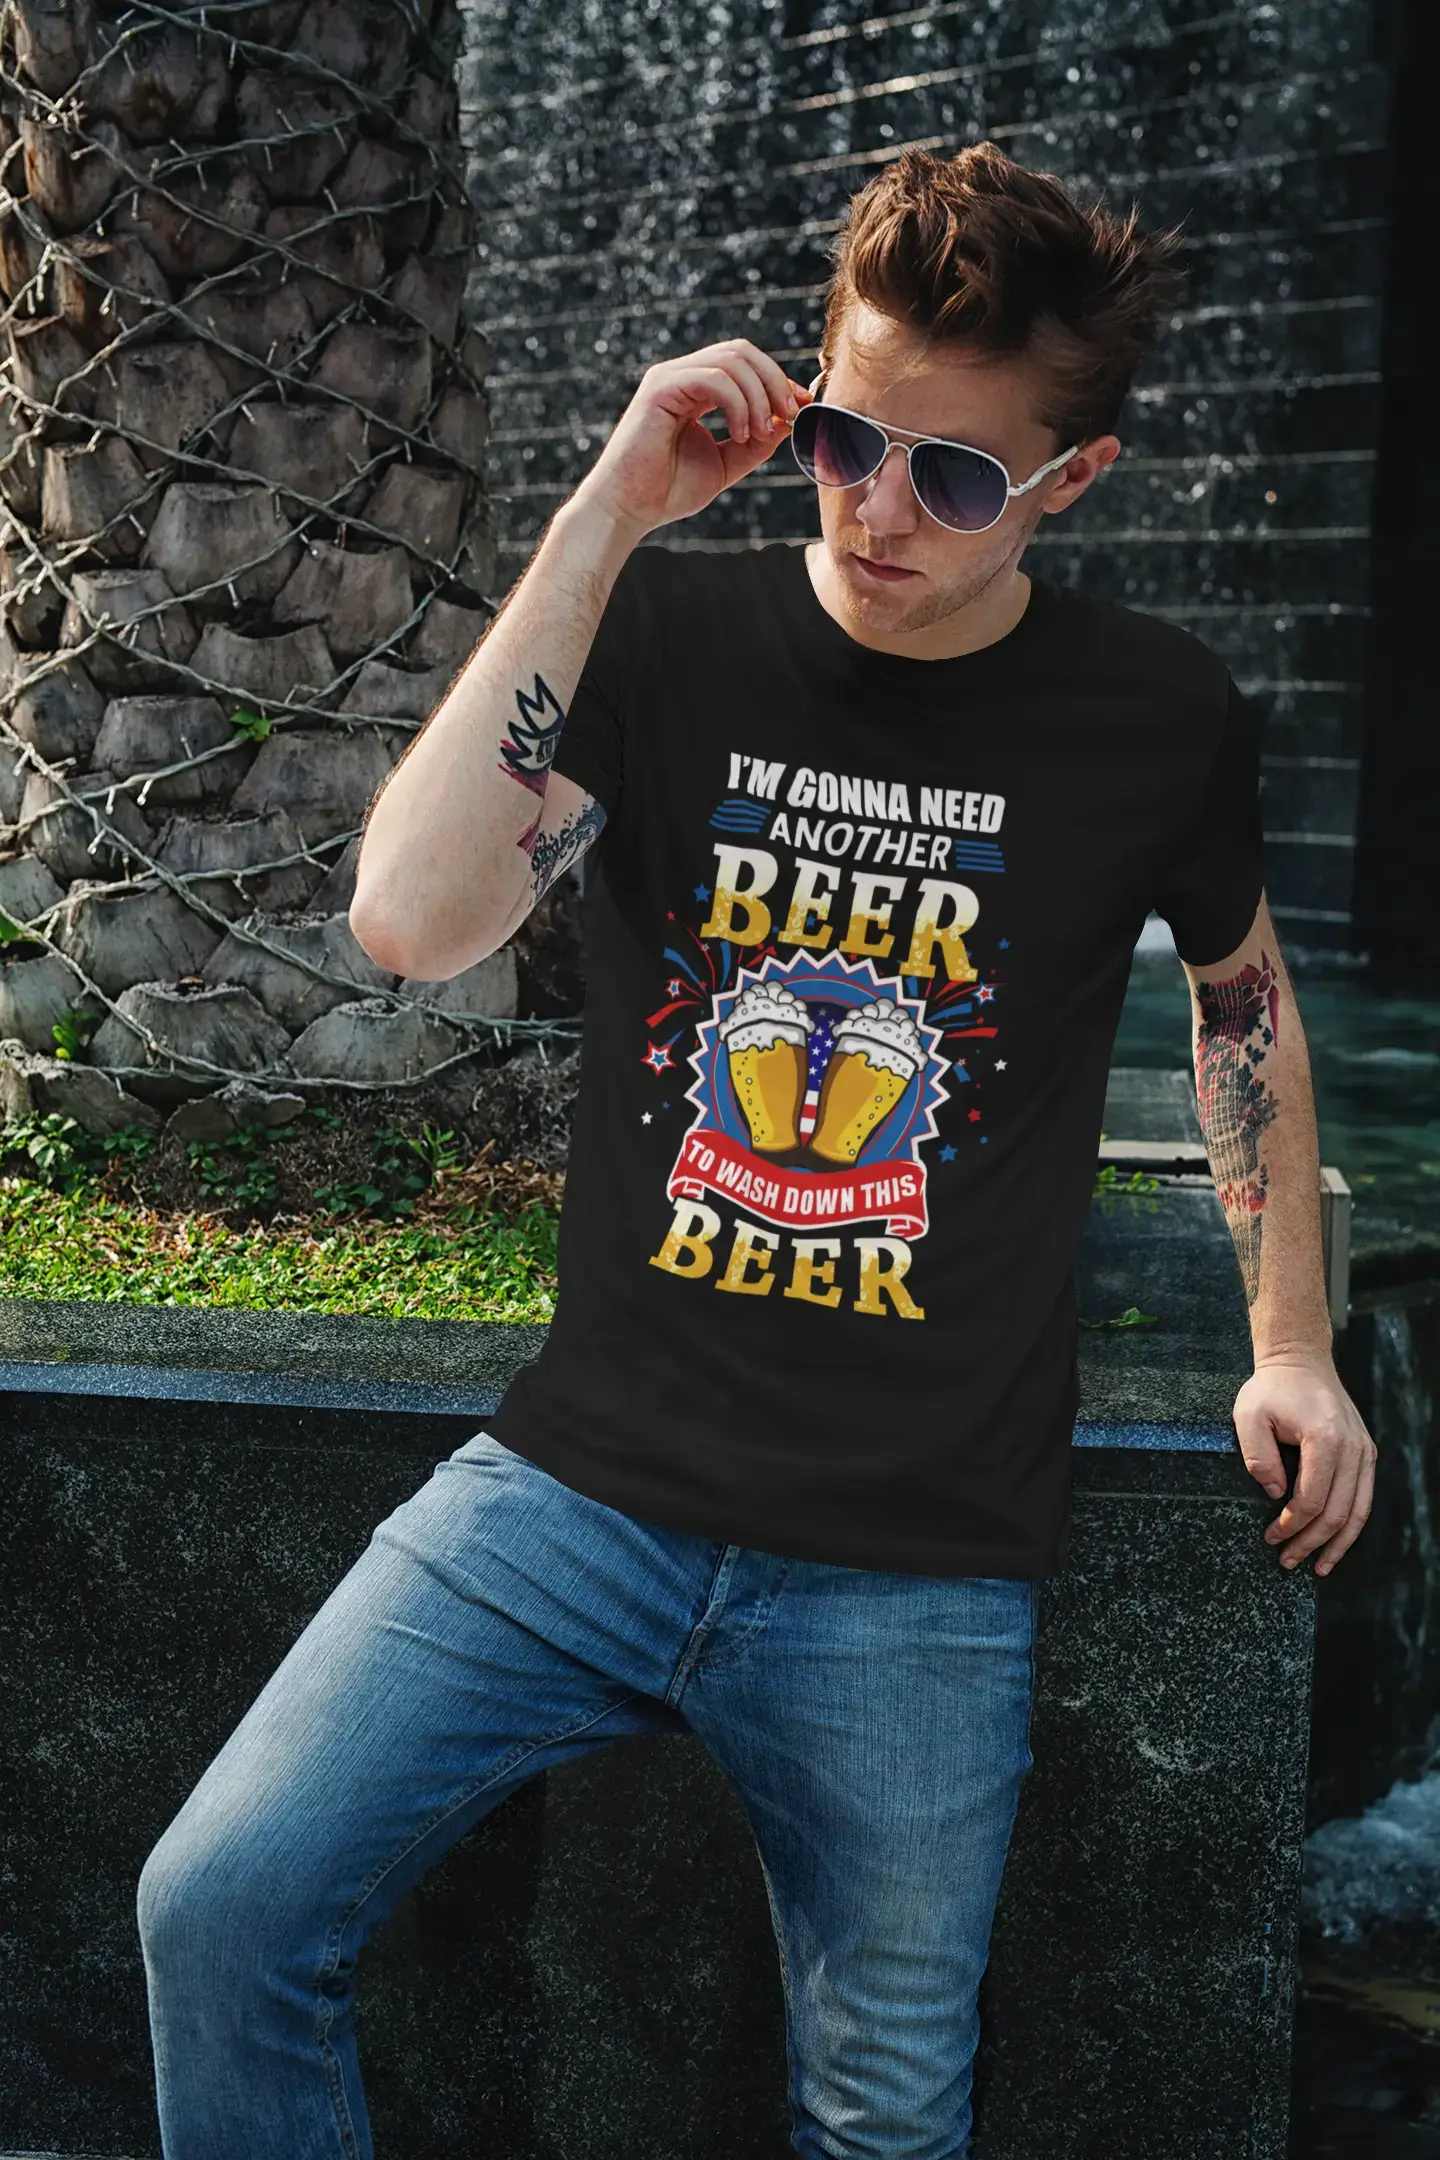 ULTRABASIC Men's T-Shirt I'm Gonna Need Another Beer to Wash Down This Beer - Funny Saying Alcohol Lover Tee Shirt